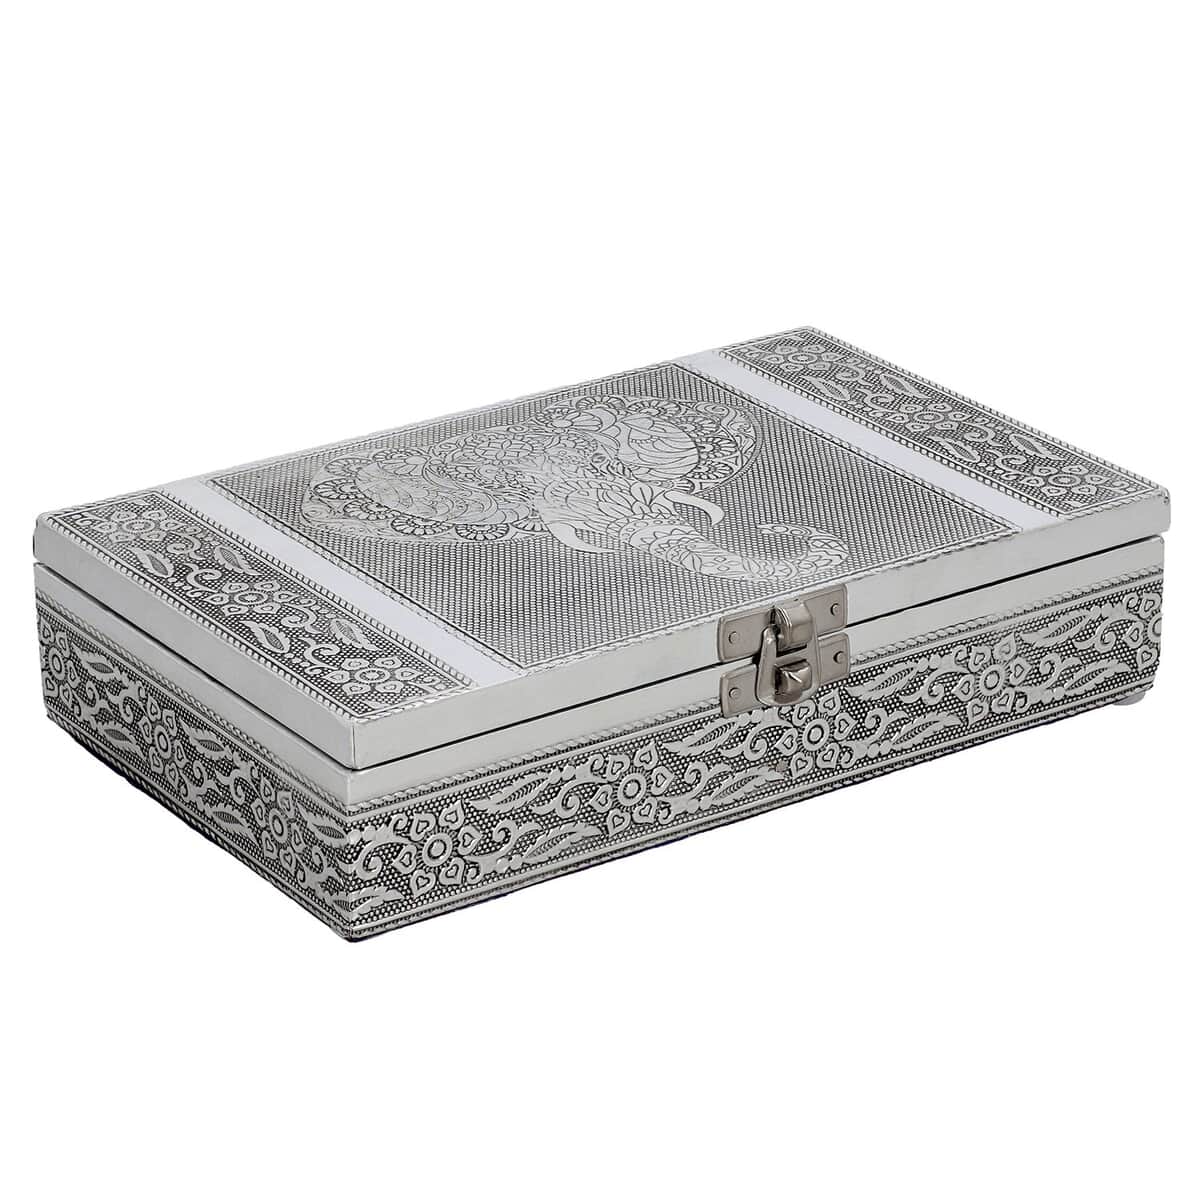 Aluminum Oxidized, Handmade, Elephant Patterned Story Jewelry Box With Anti Scratch Protection Interior image number 0